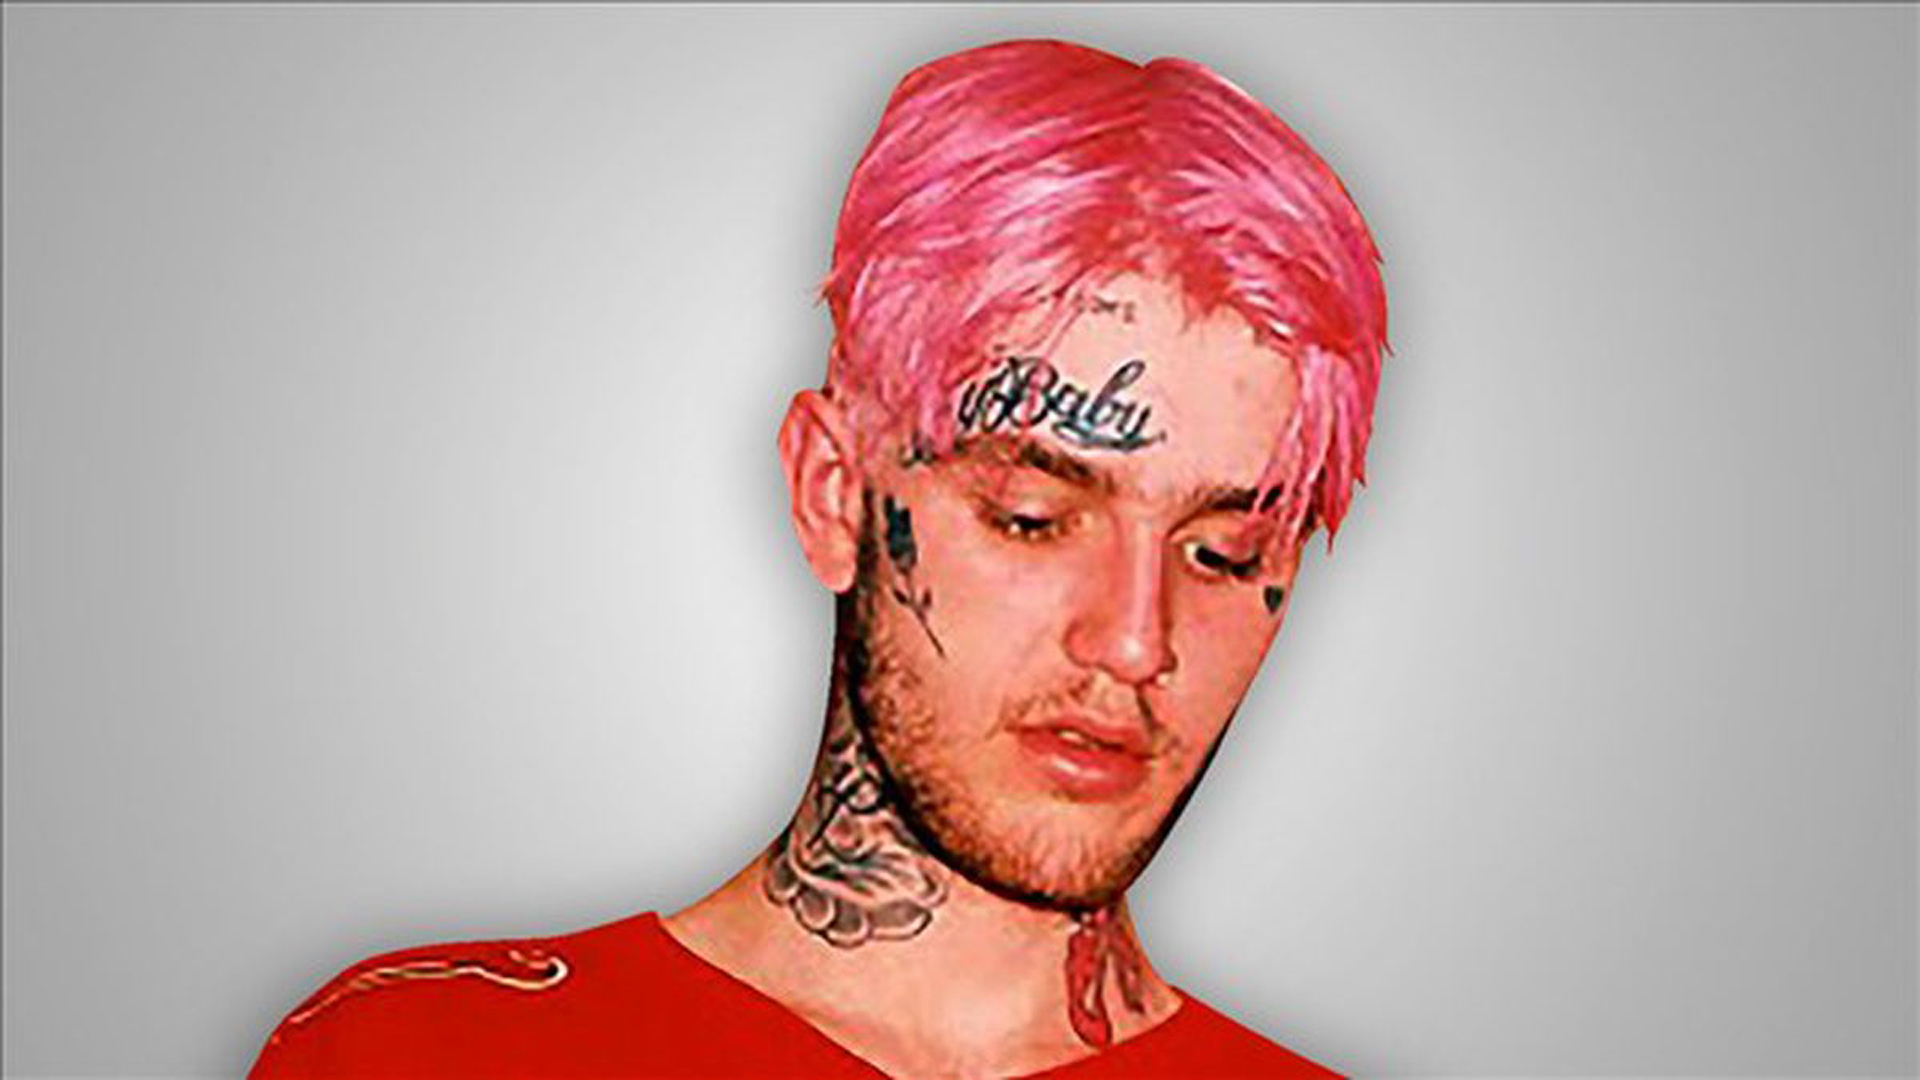 Redhead Lil Peep Is Wearing Red Dress Having Tattoos On Face And Neck HD Lil Peep